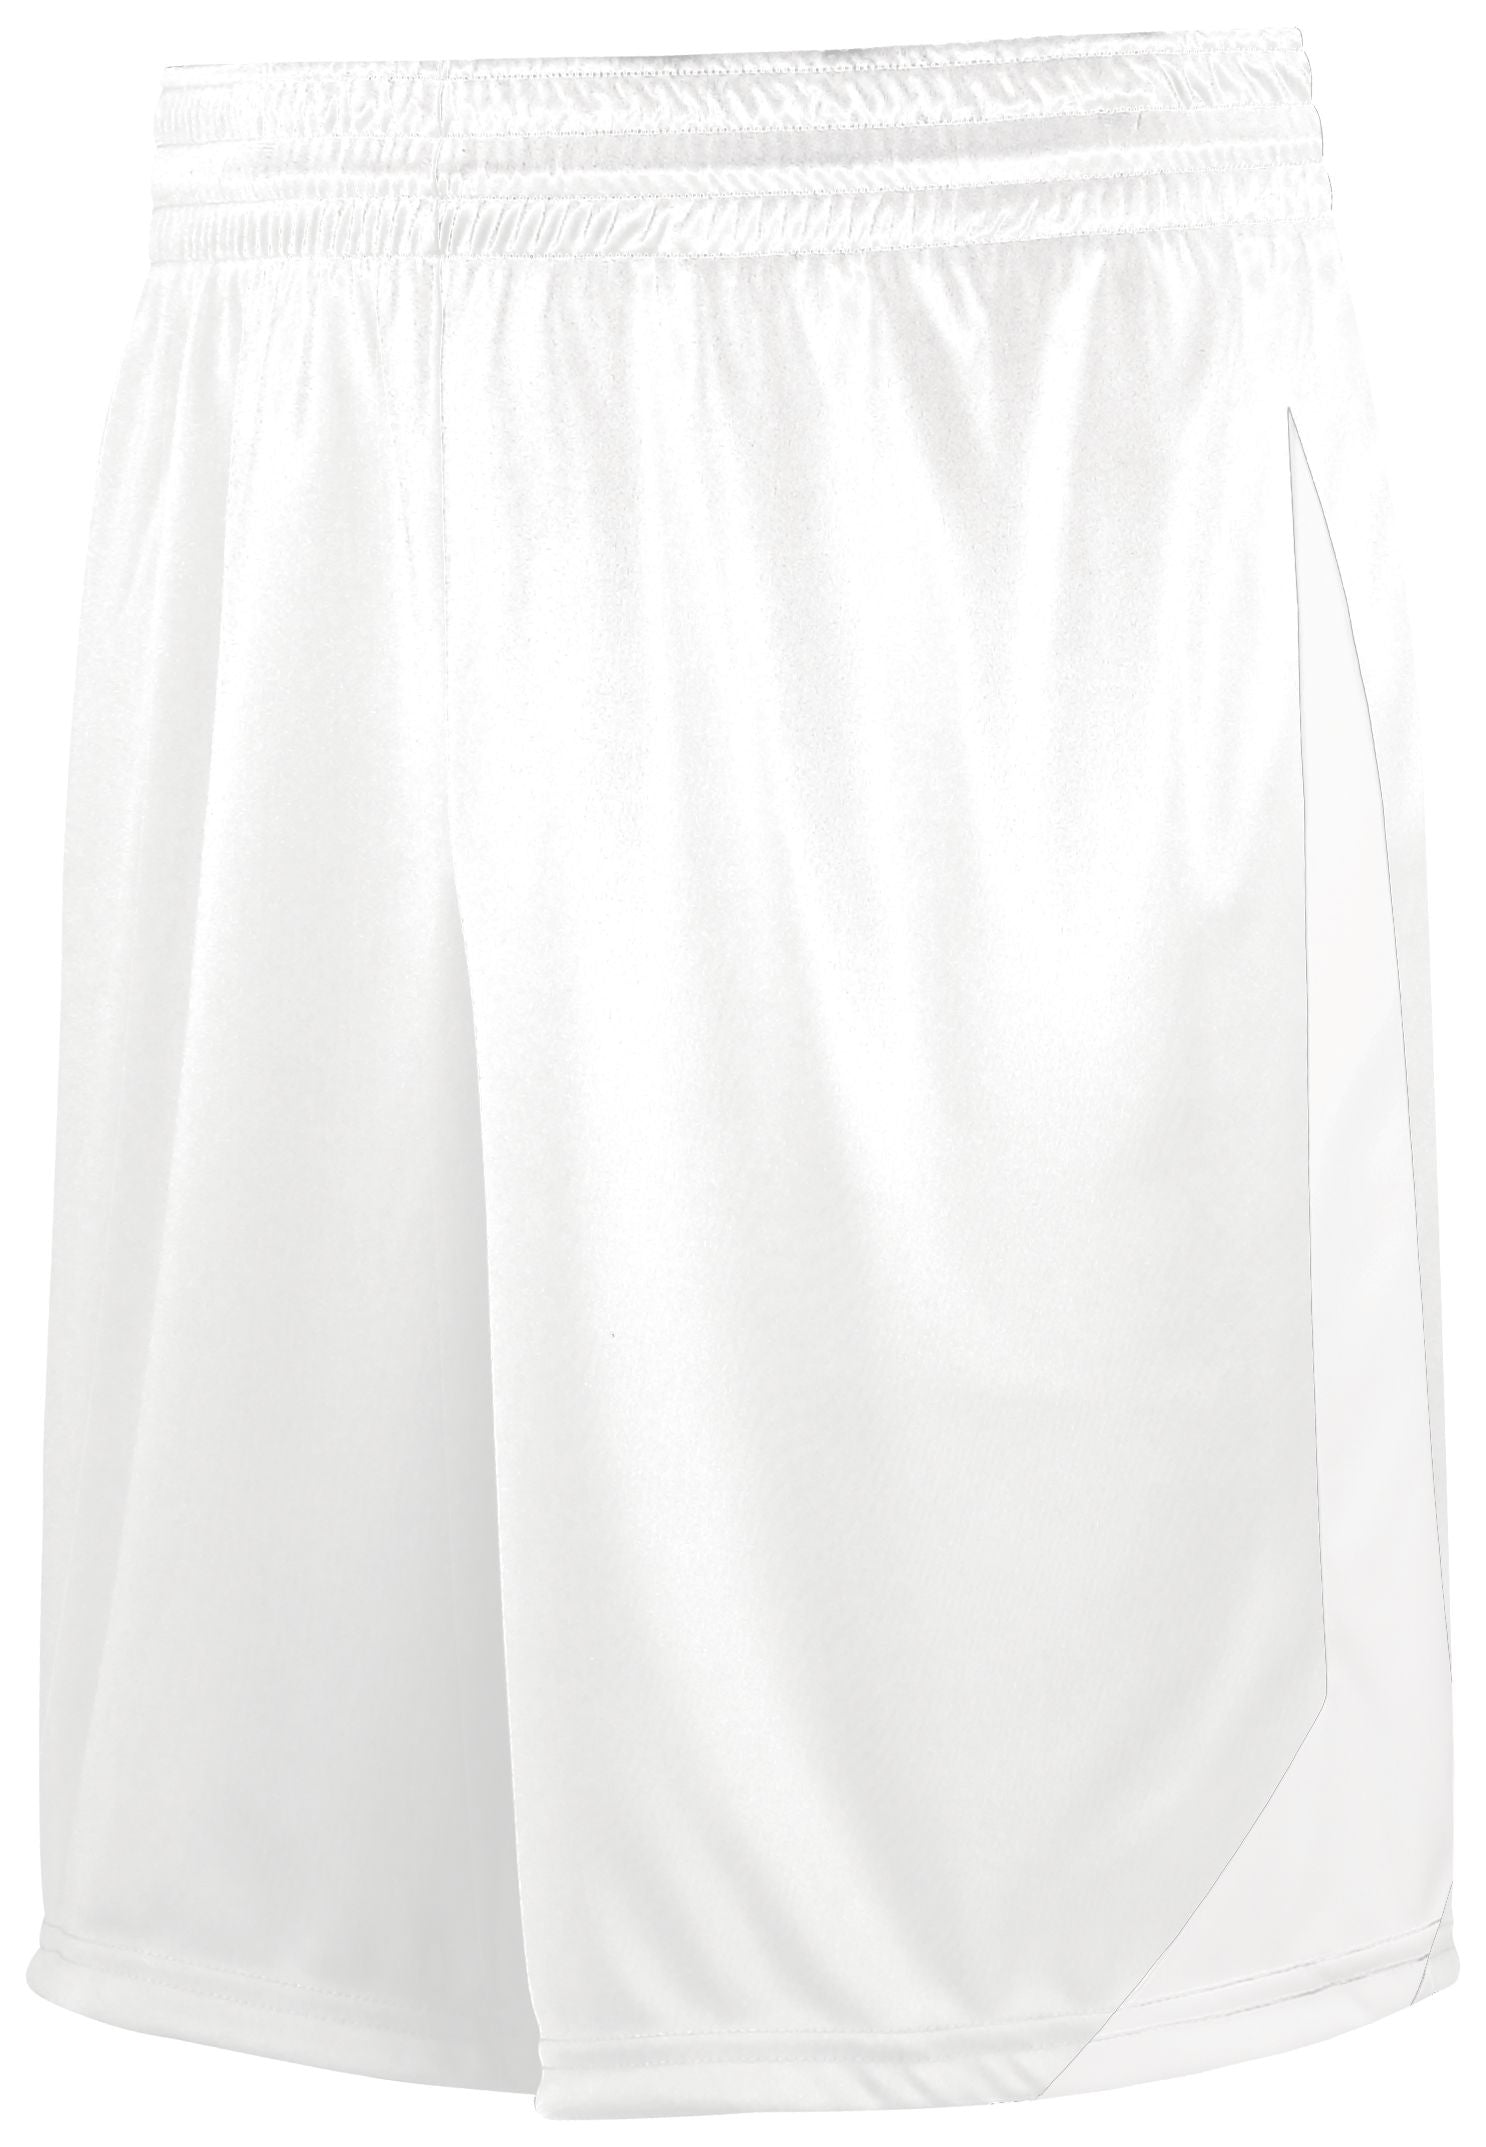 High 5 Youth Athletico Shorts in White  -Part of the Youth, Youth-Shorts, High5-Products, Soccer, All-Sports-1 product lines at KanaleyCreations.com